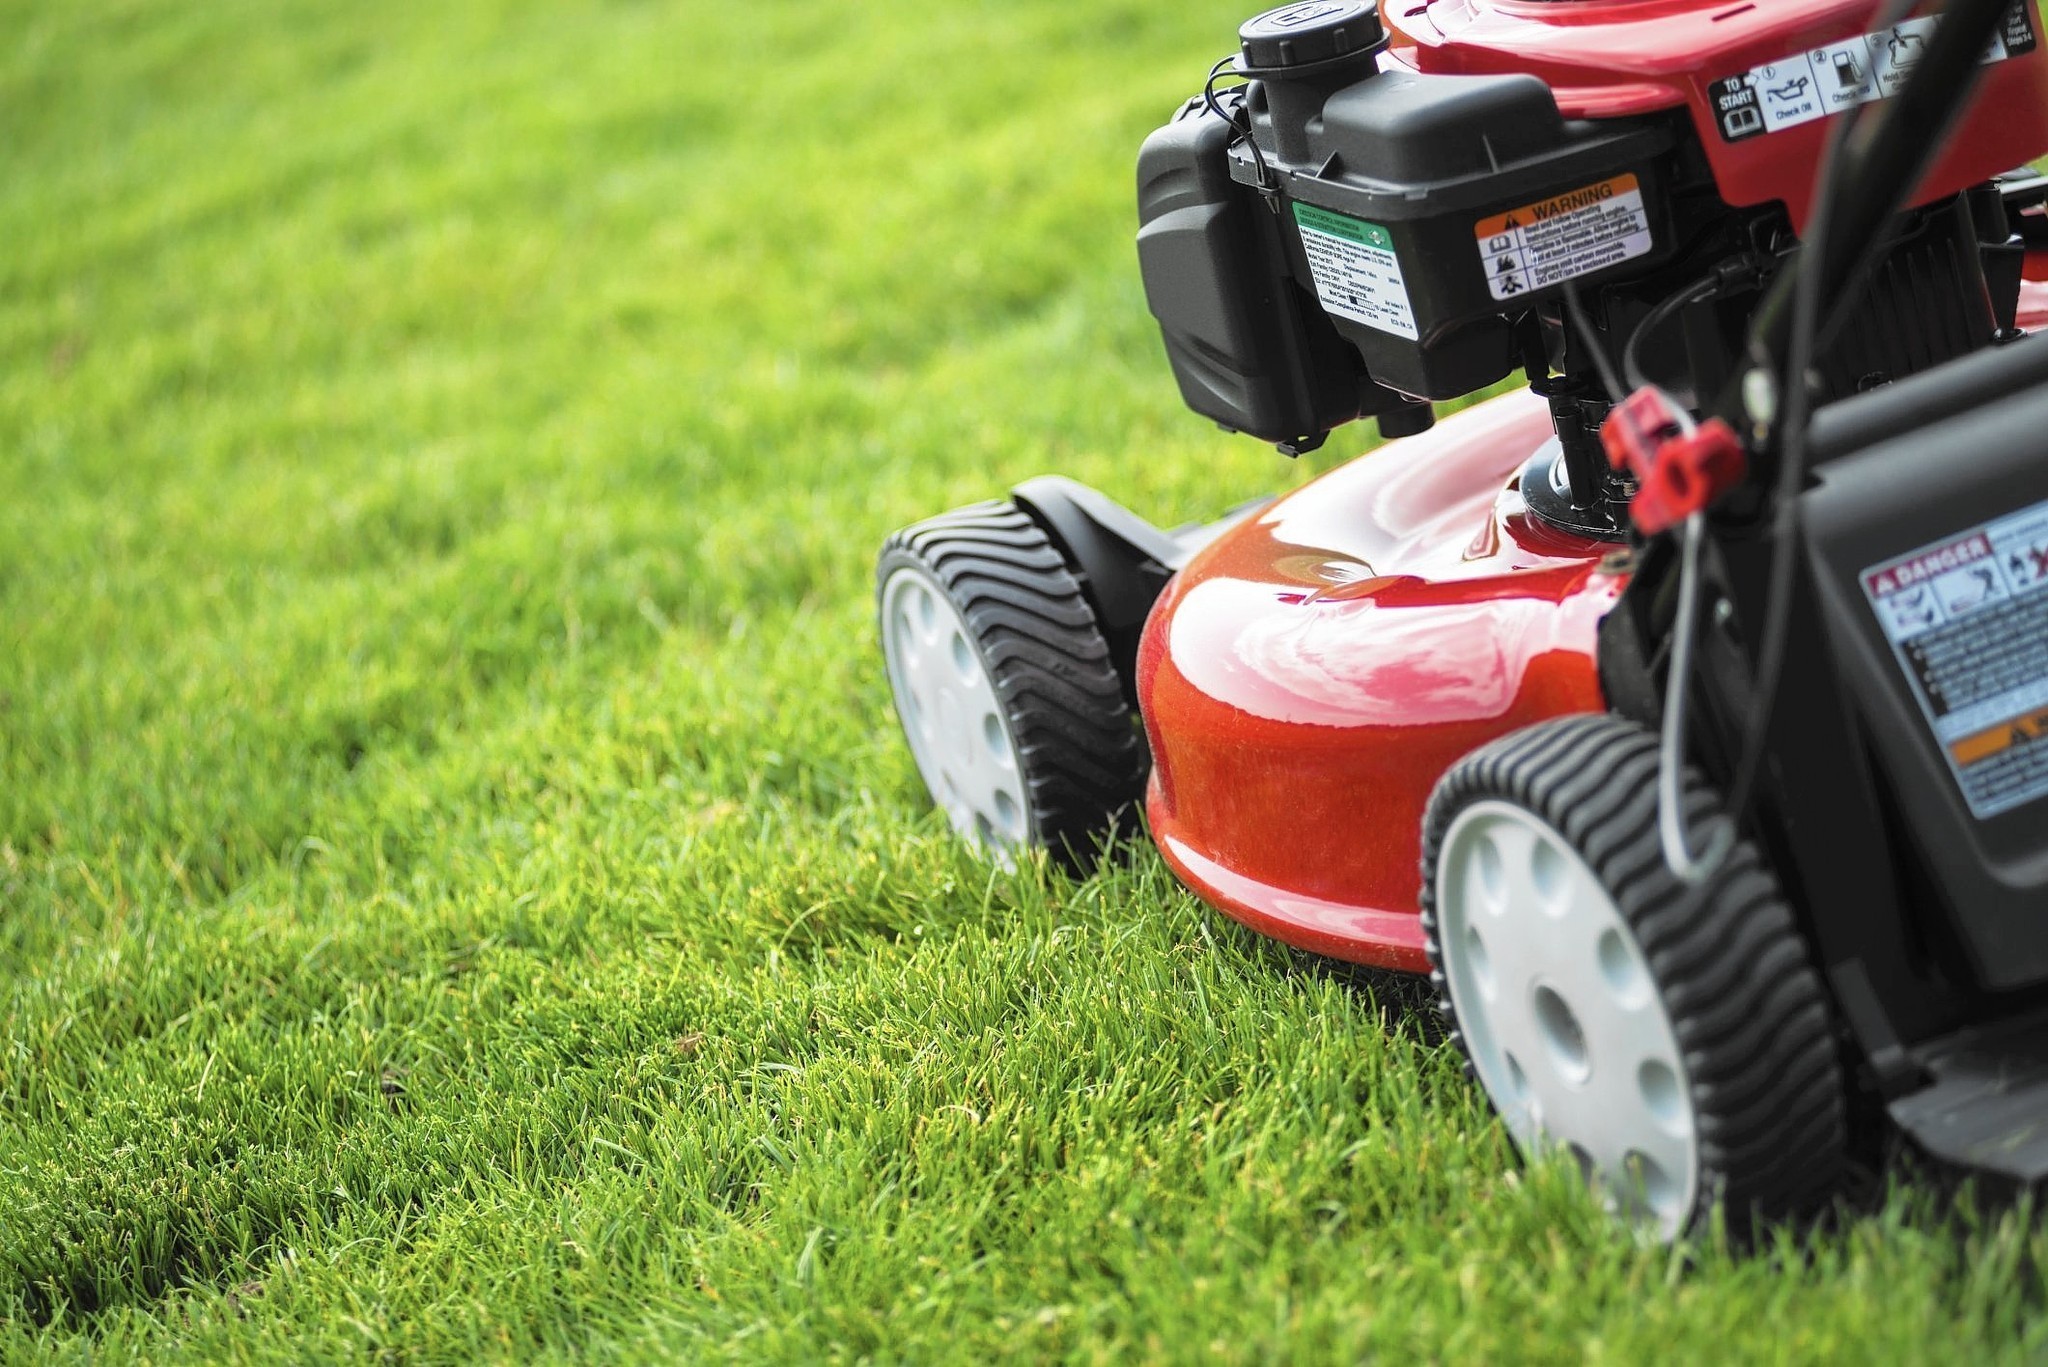 new-lawn-mowers-are-easier-to-use-quieter-chicago-tribune